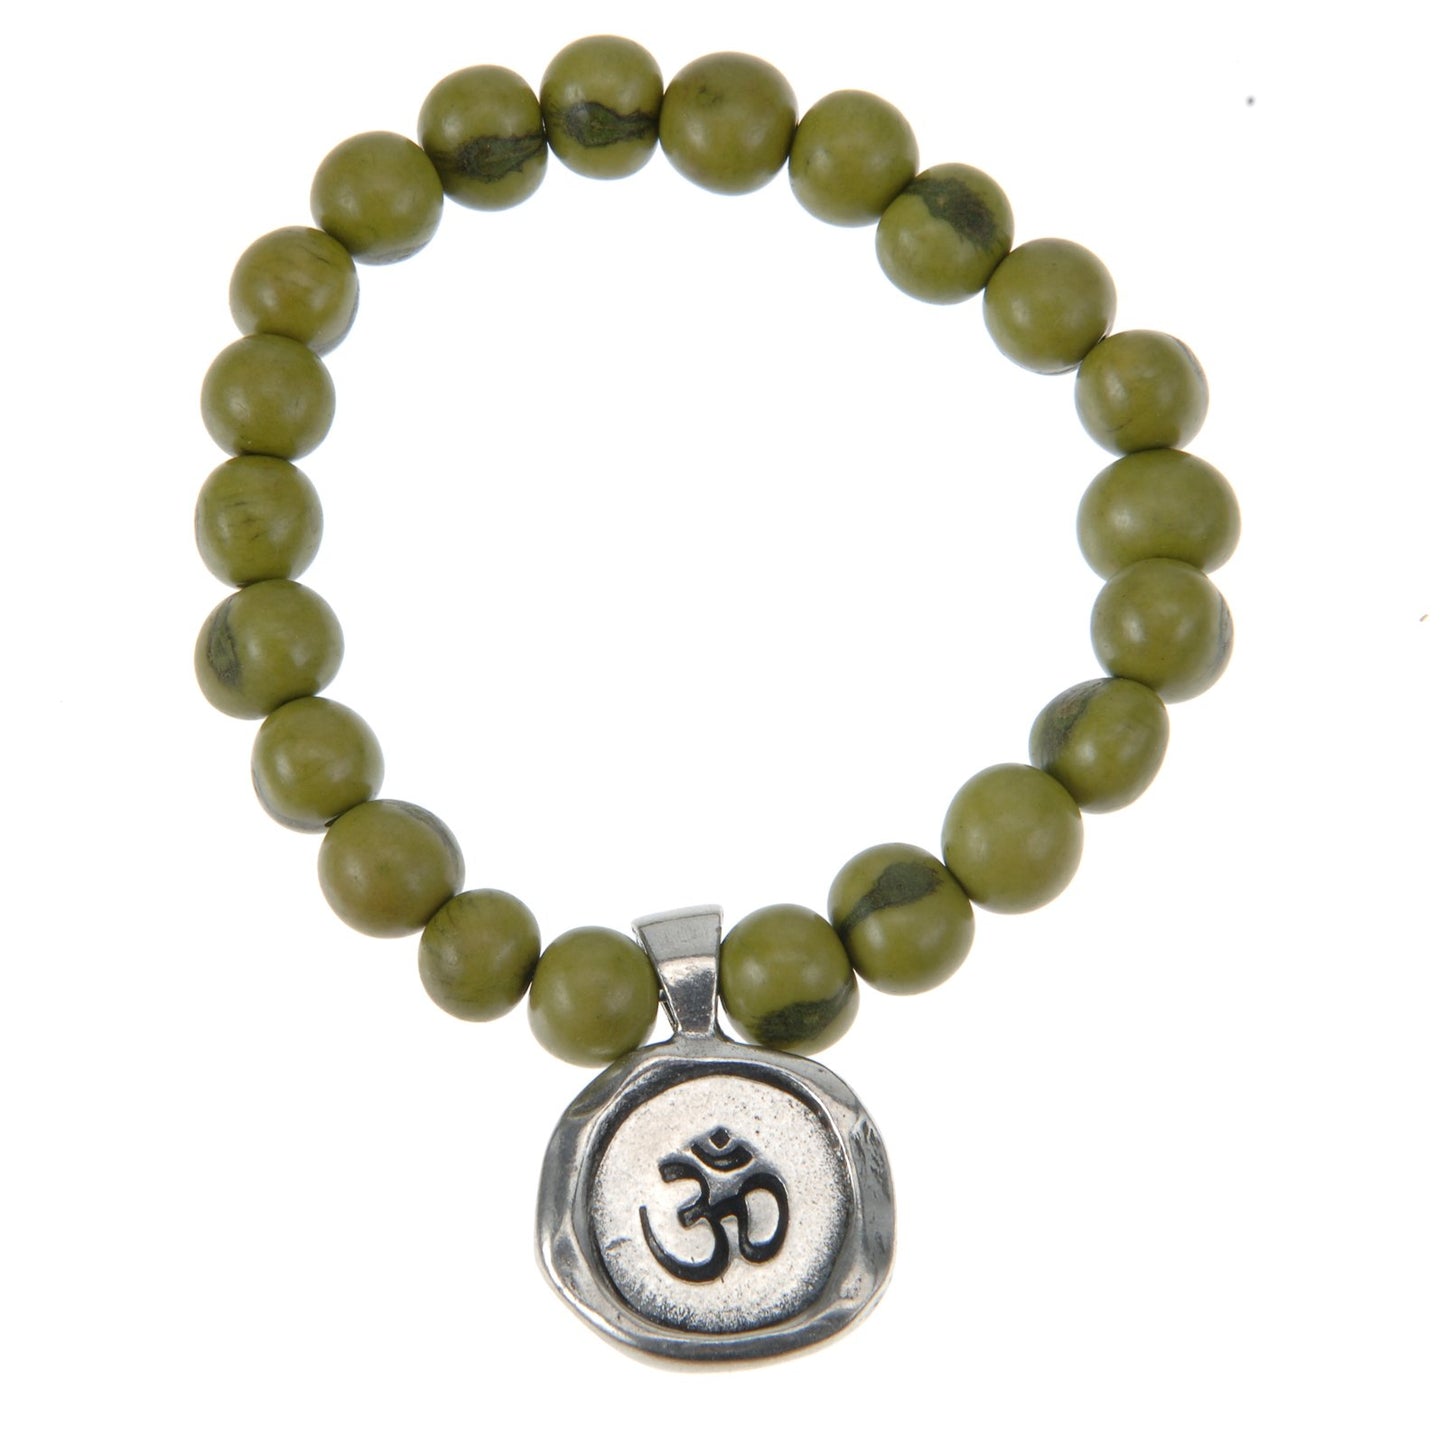 Tiger Olive Green Acai Seeds of Life Bracelet with Wax Seal - Whitney Howard Designs